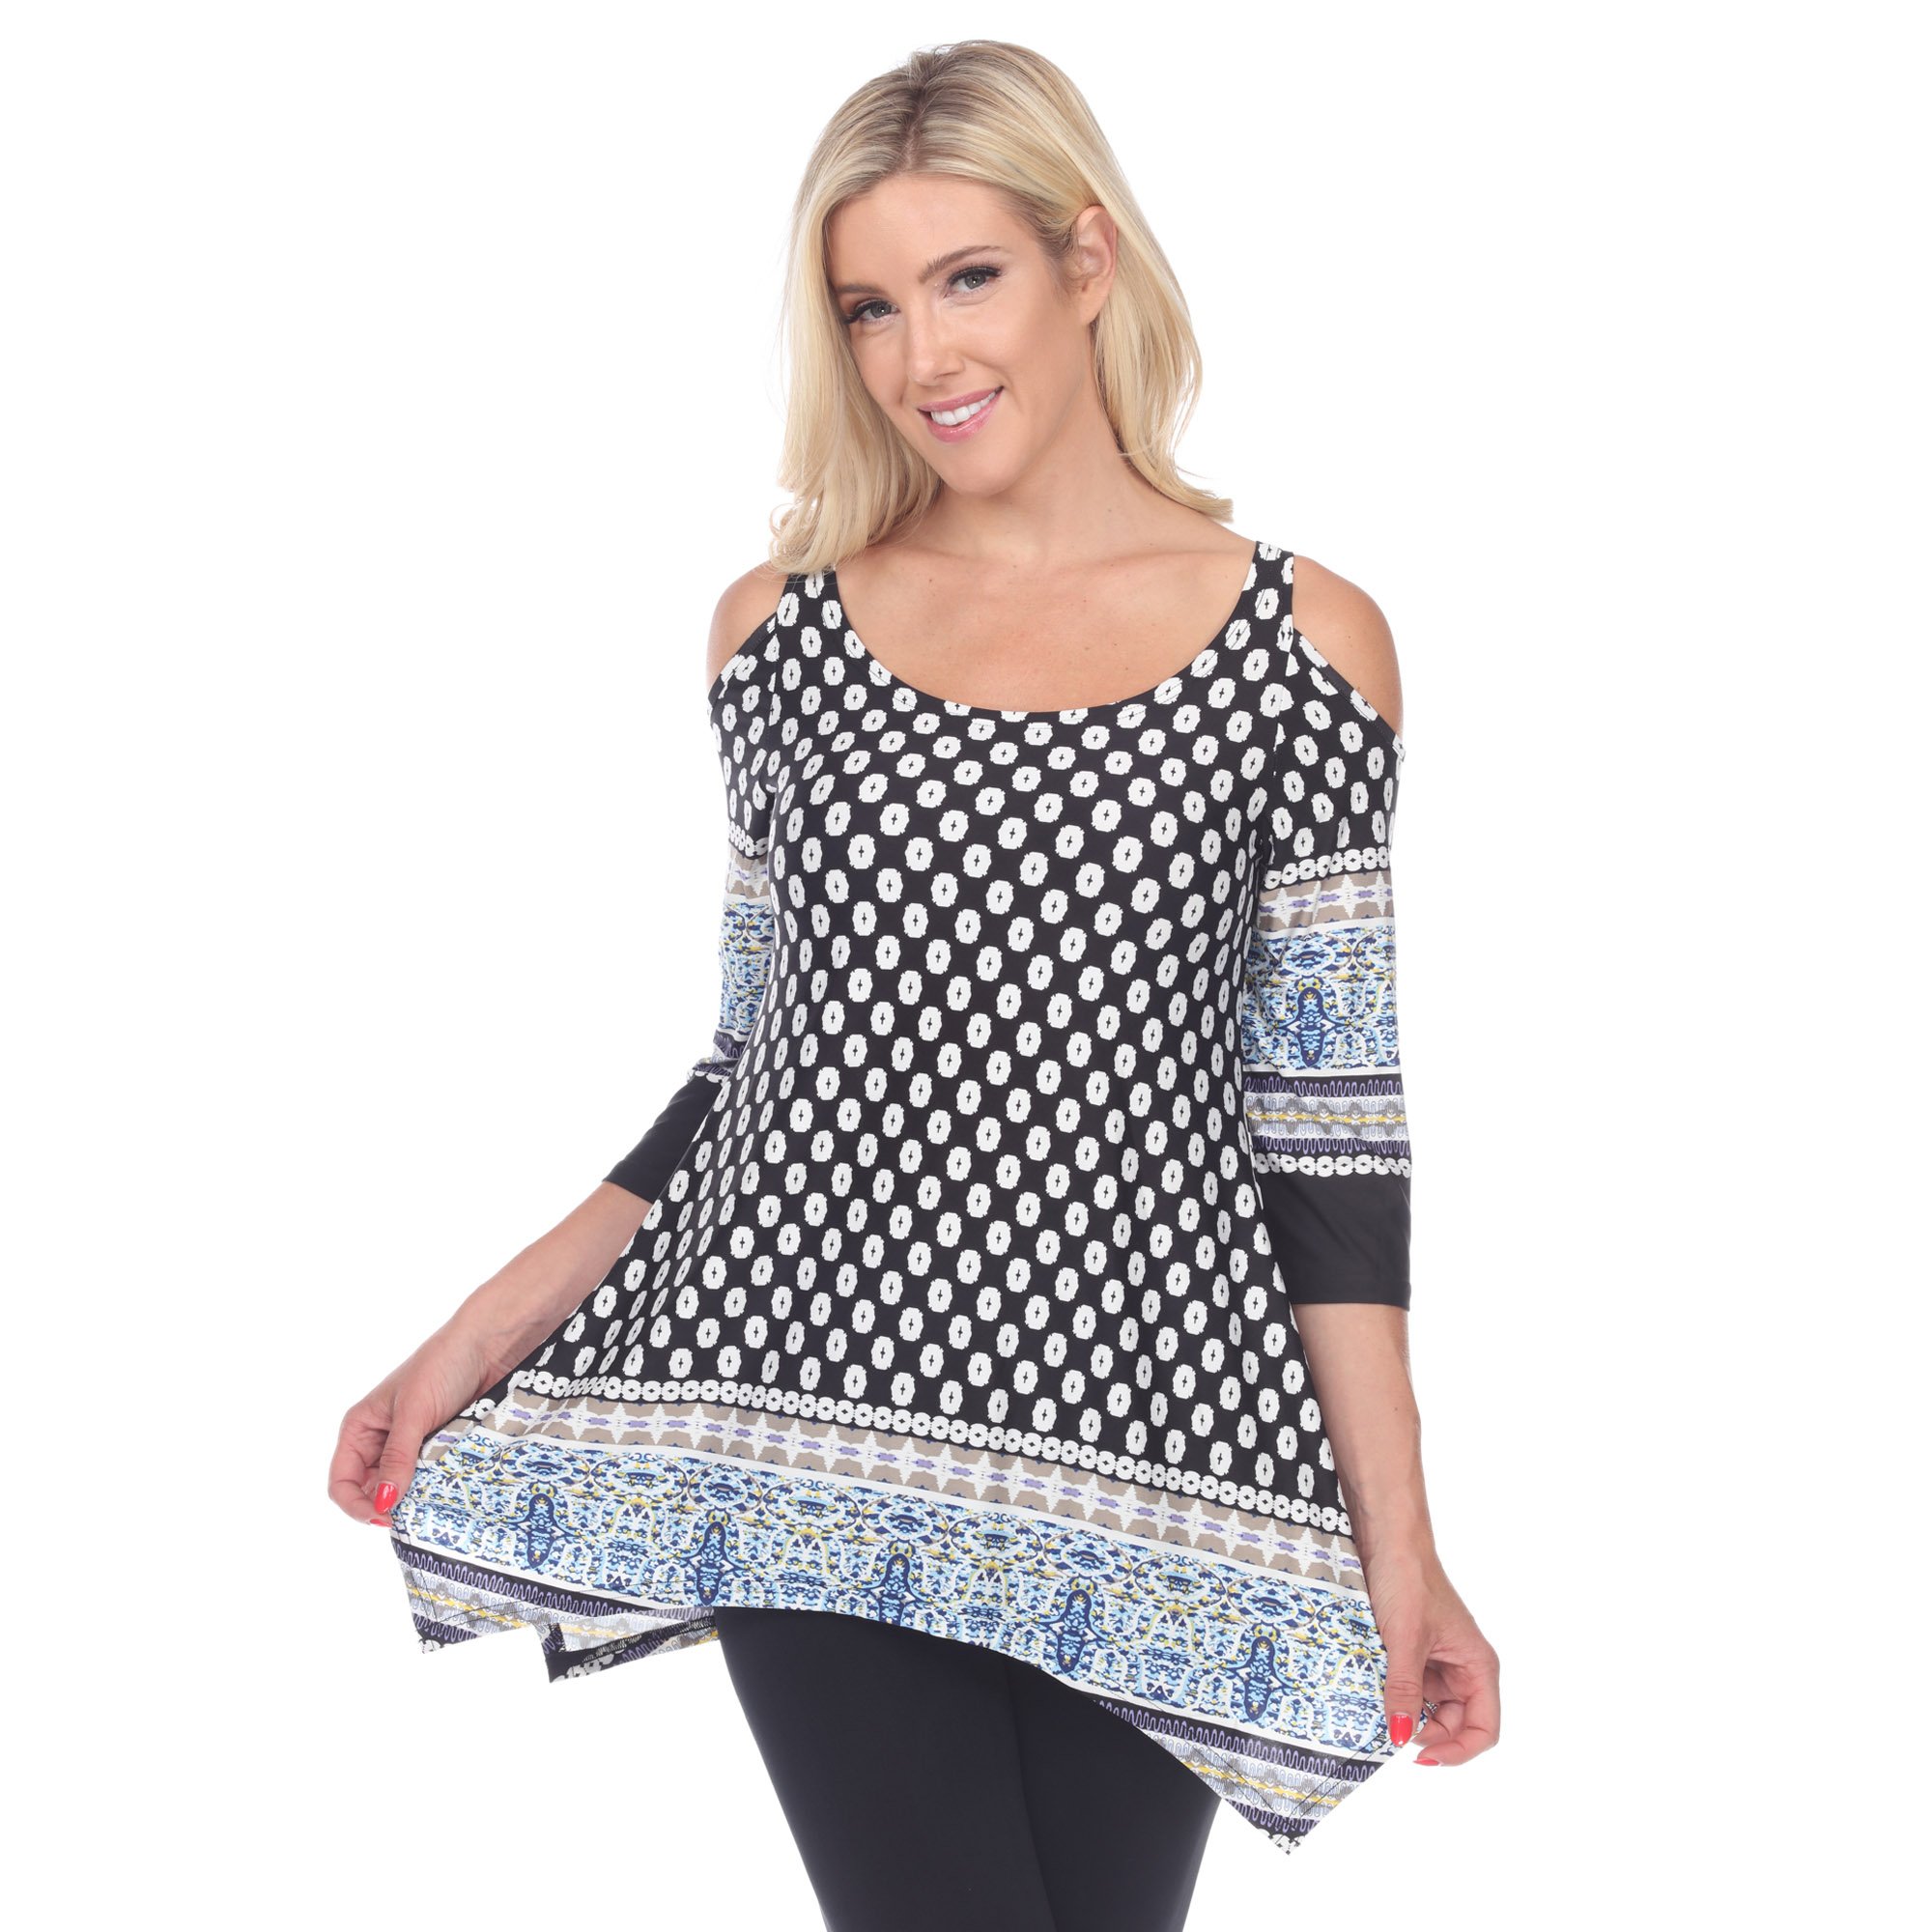 White Mark Women's Cold Shoulder Quarter Sleeve Printed Tunic Top With Pockets - Black/White Polka Dots, 1X